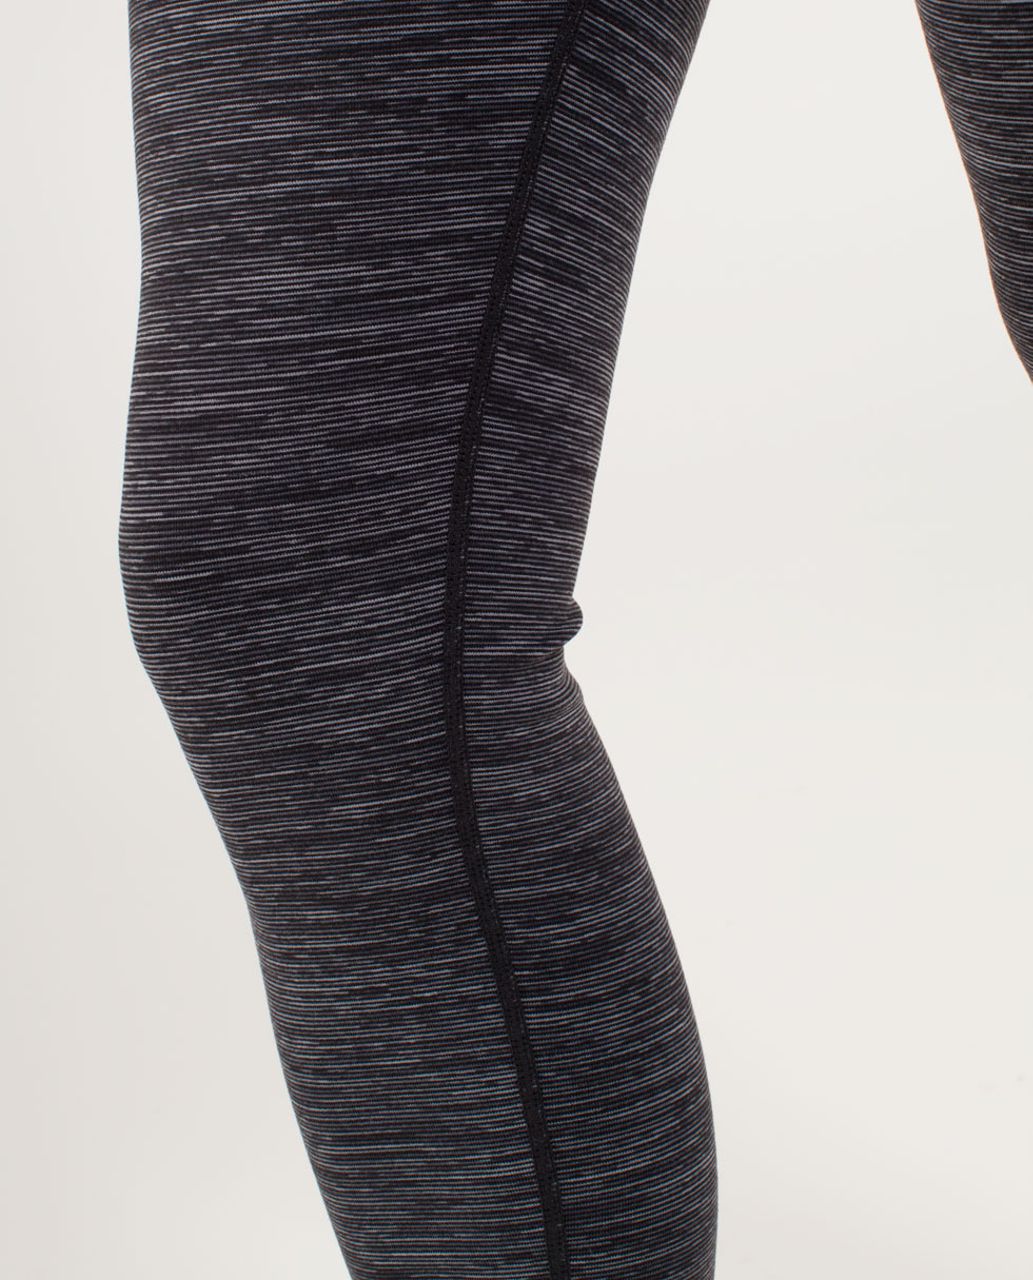 Lululemon Wunder Under Pant - Wee Are From Space Black Combo